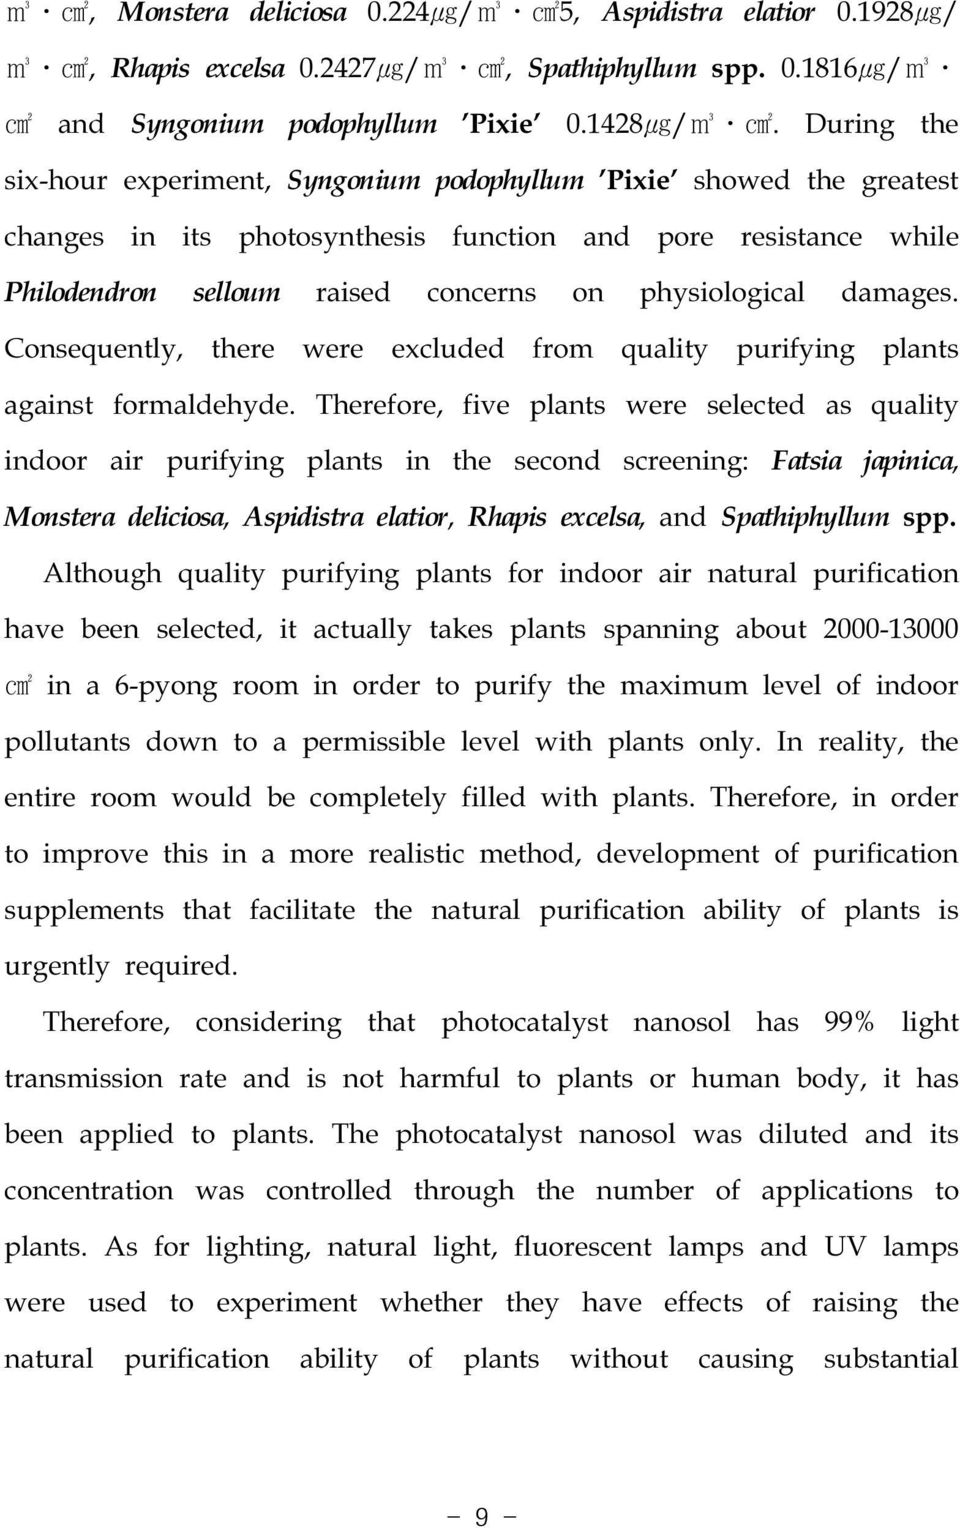 physiological damages. Consequently, there were excluded from quality purifying plants against formaldehyde.